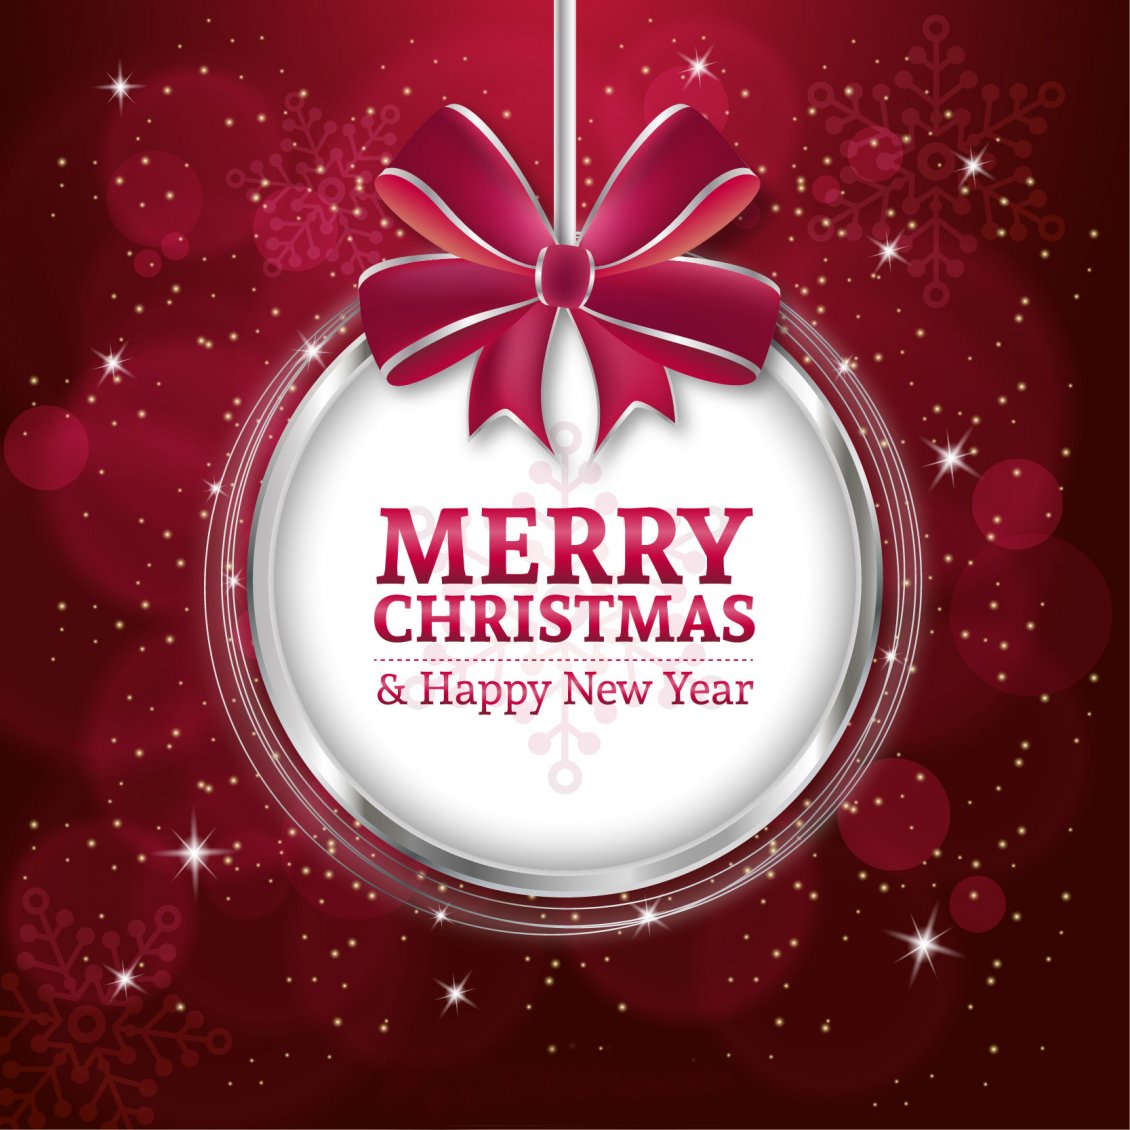 Wonderful red wallpaper - Merry Christmas and Happy New Year